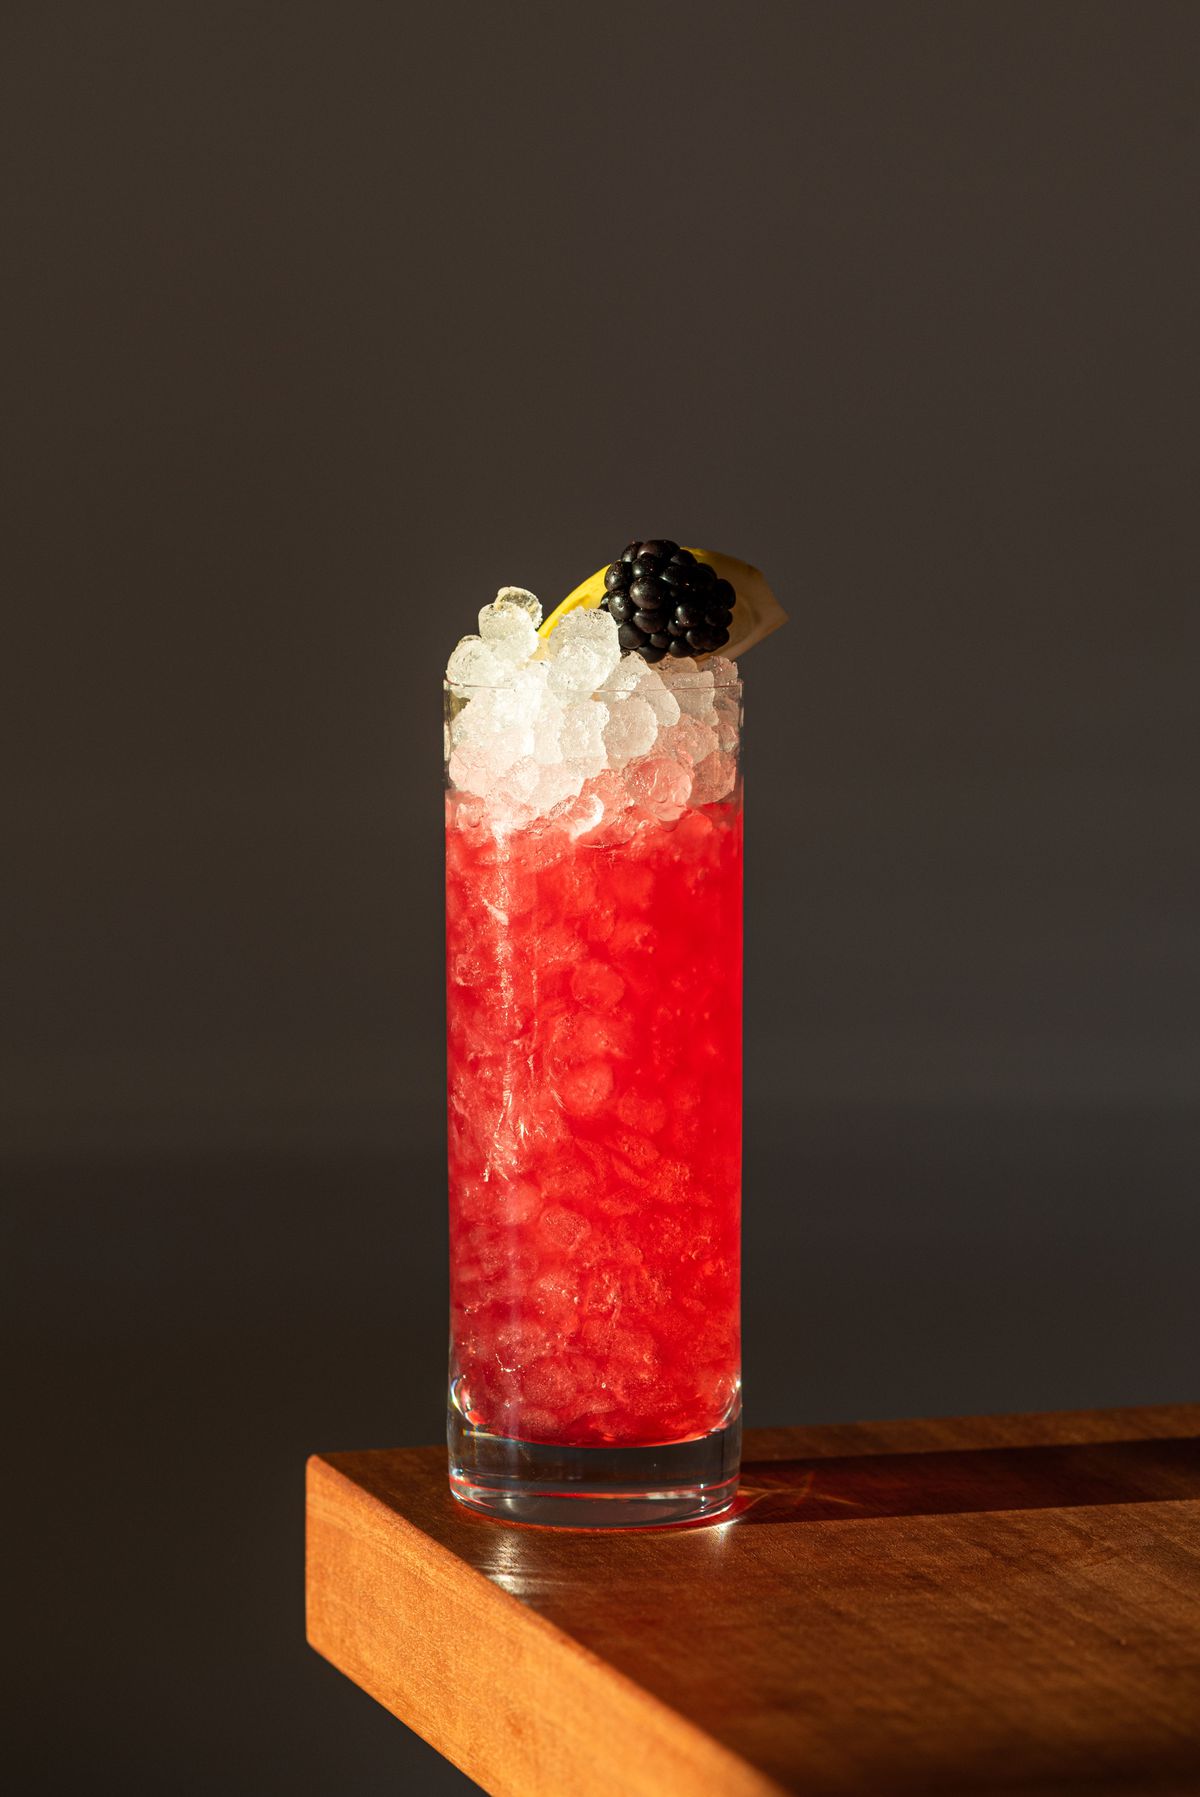 Blackberry hibiscus swizzle at Cha Cha Cha restaurant in Downtown Los Angeles